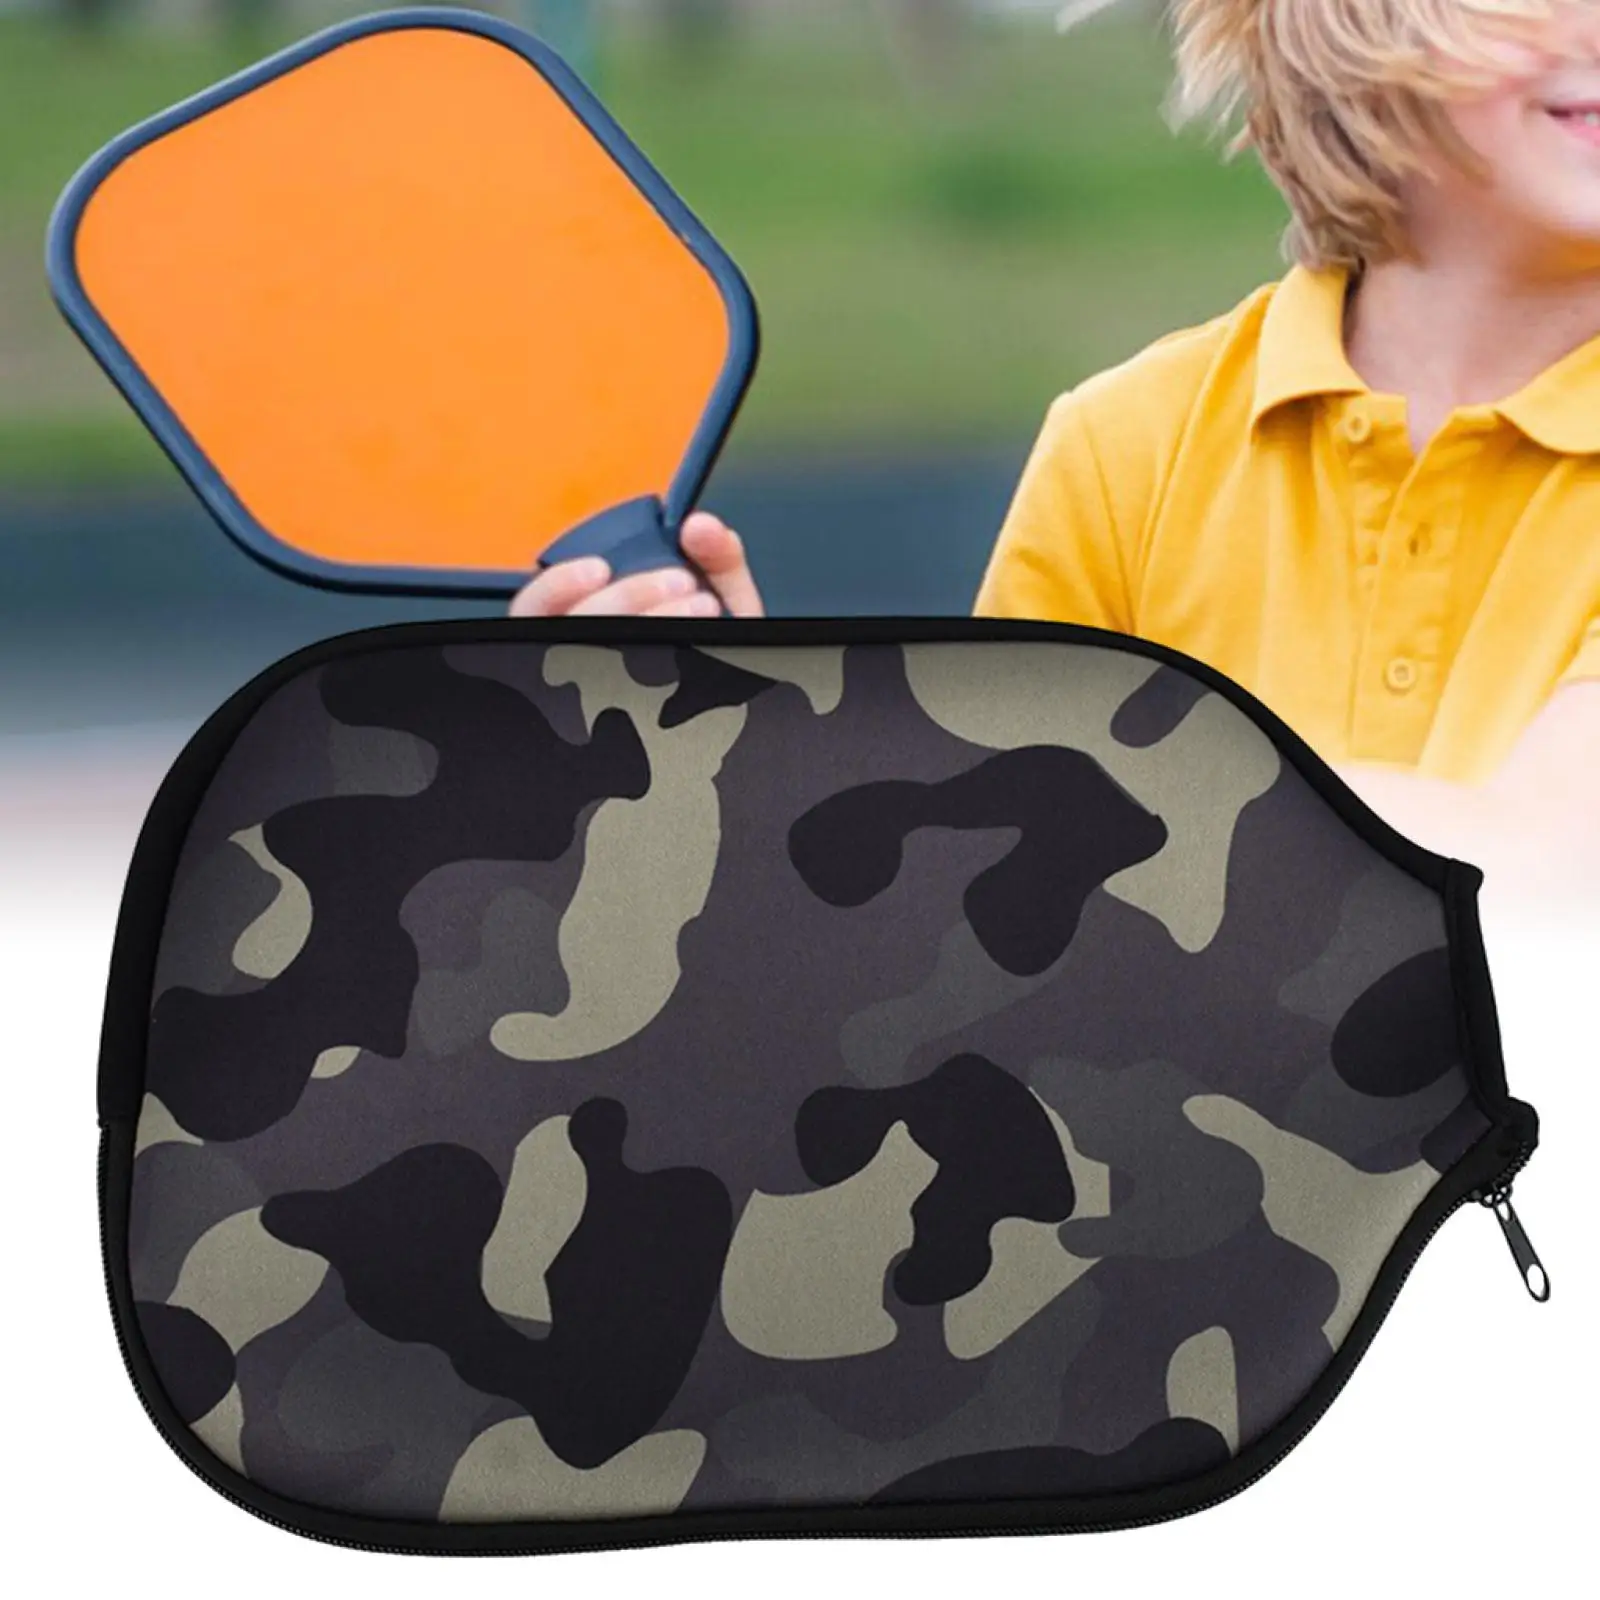 Neoprene Pickleball Racket Cover Table Tennis Paddle Case Holder Fits Most Rackets Racket Sleeve for Outdoor Practice Training